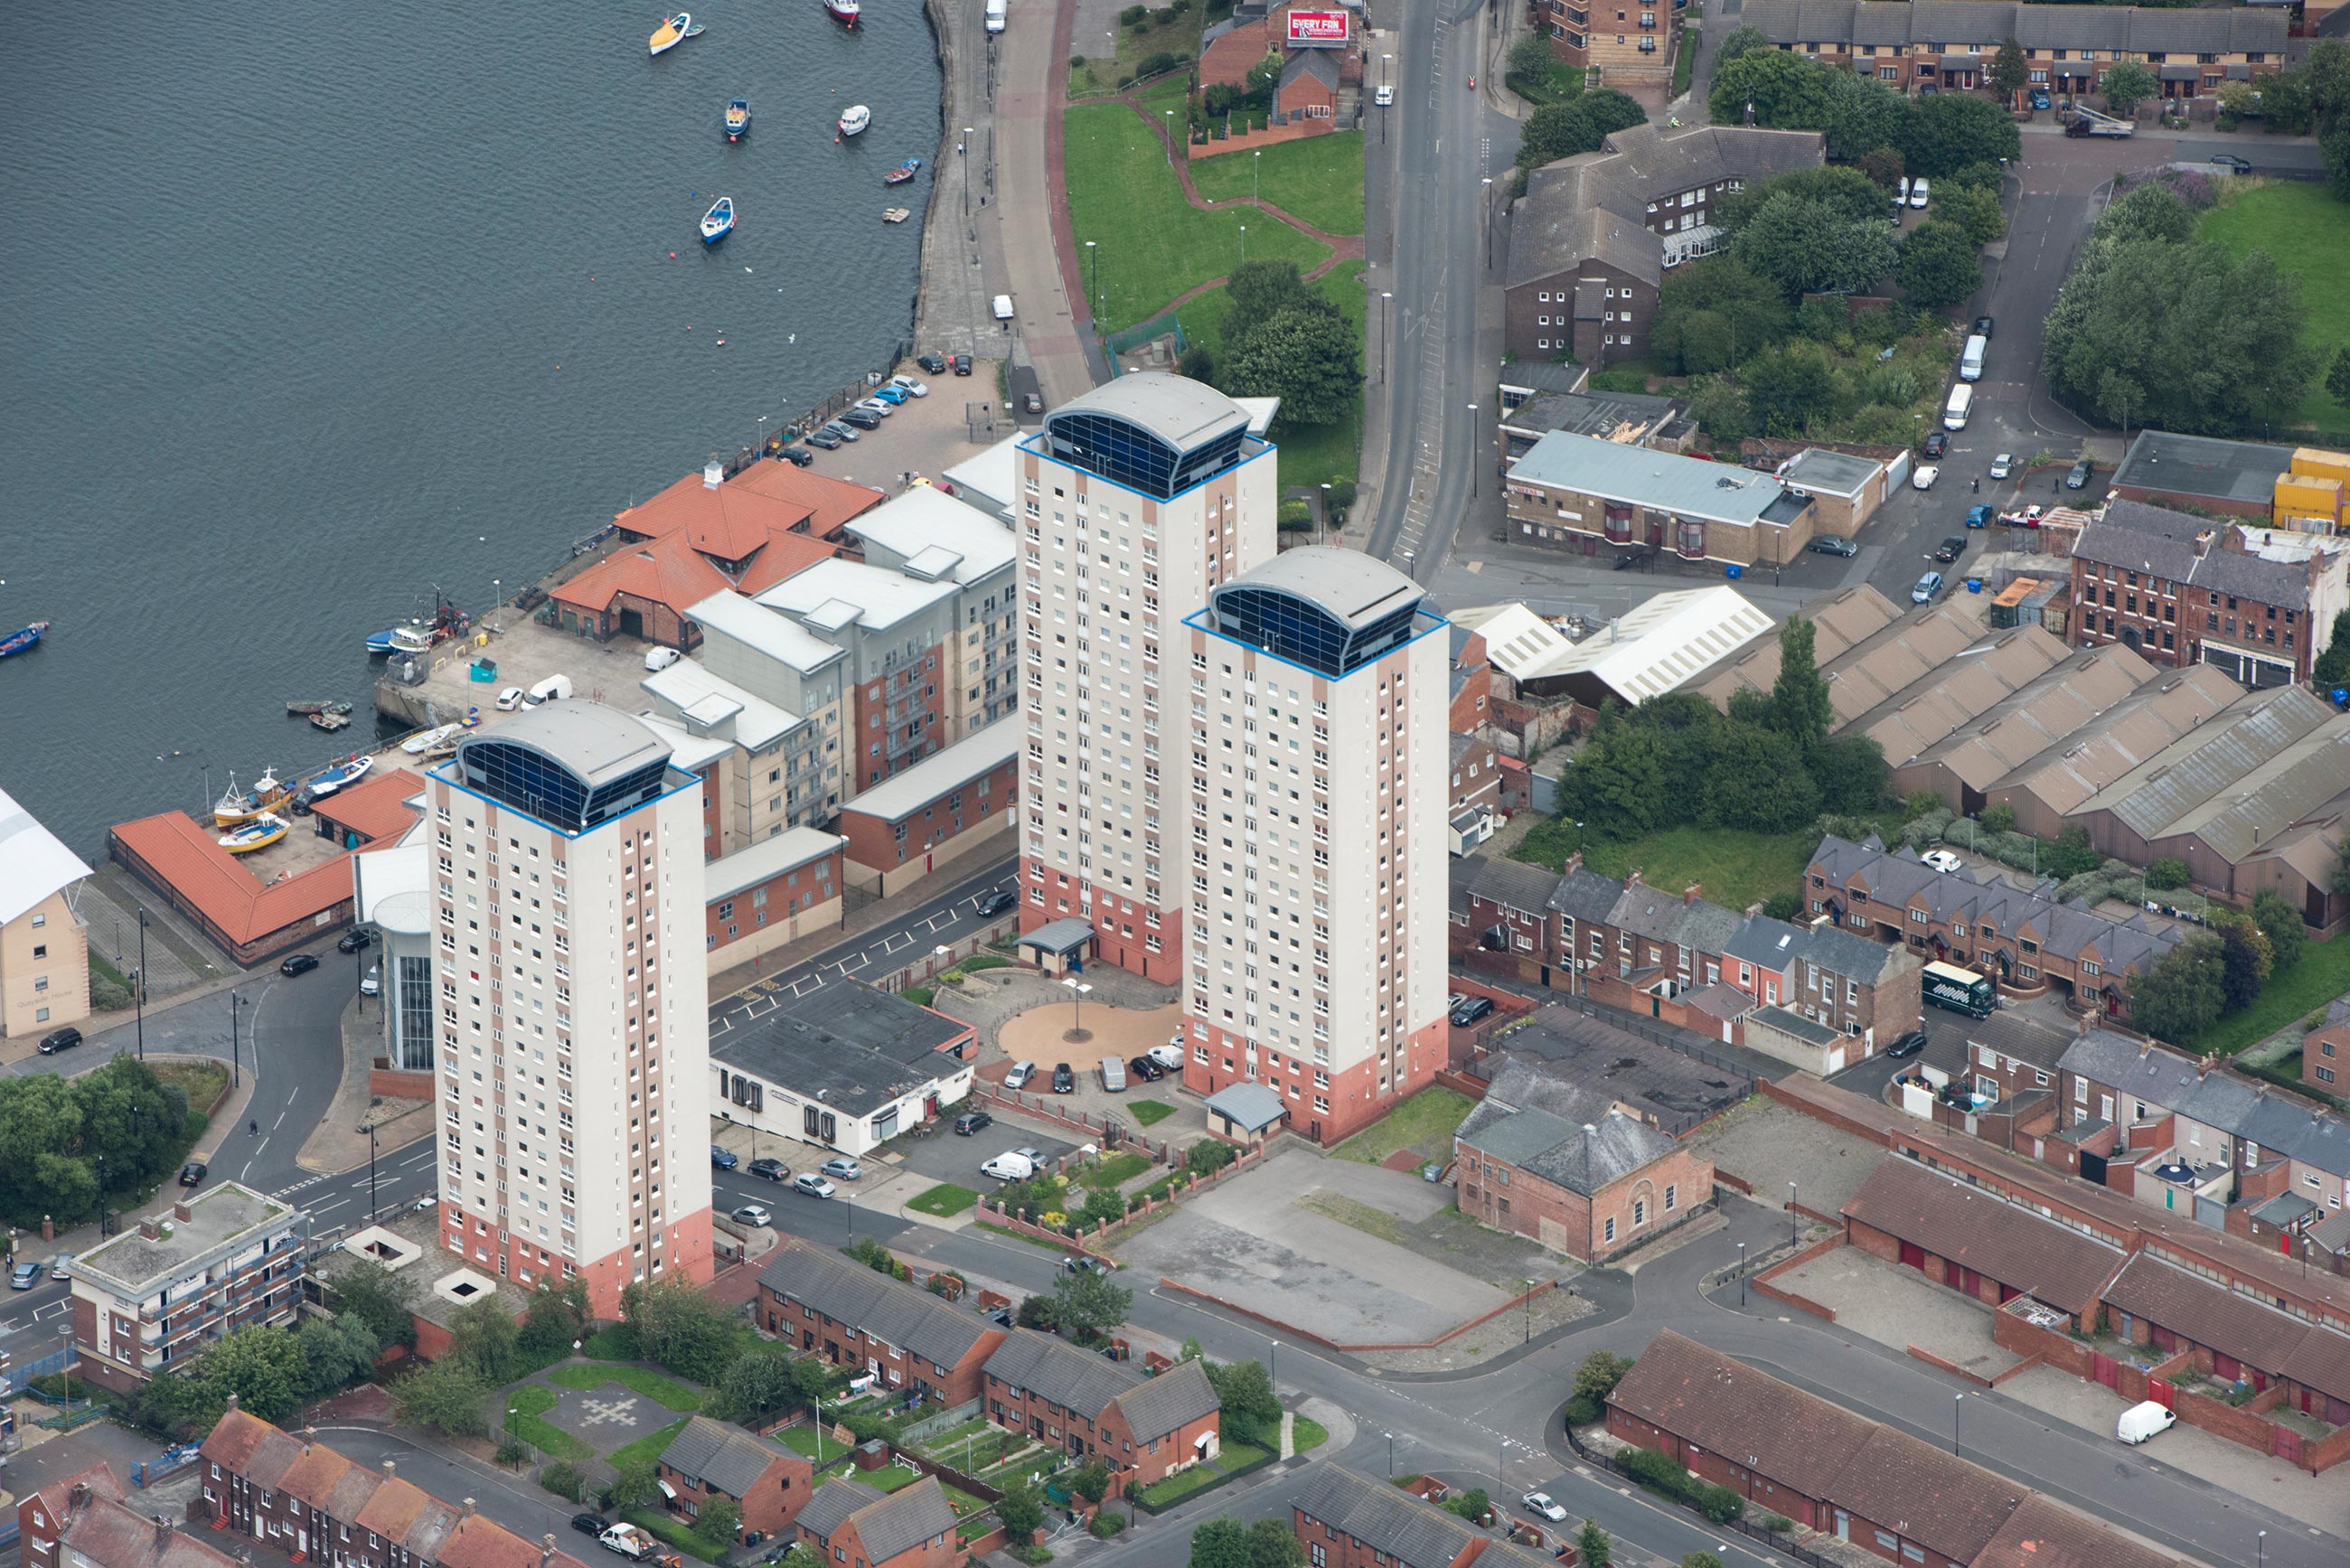 Aerial view of Phoenix Hall and three nearby tower blocks in Sunderland. The top left corner shows the shoreline and boats.